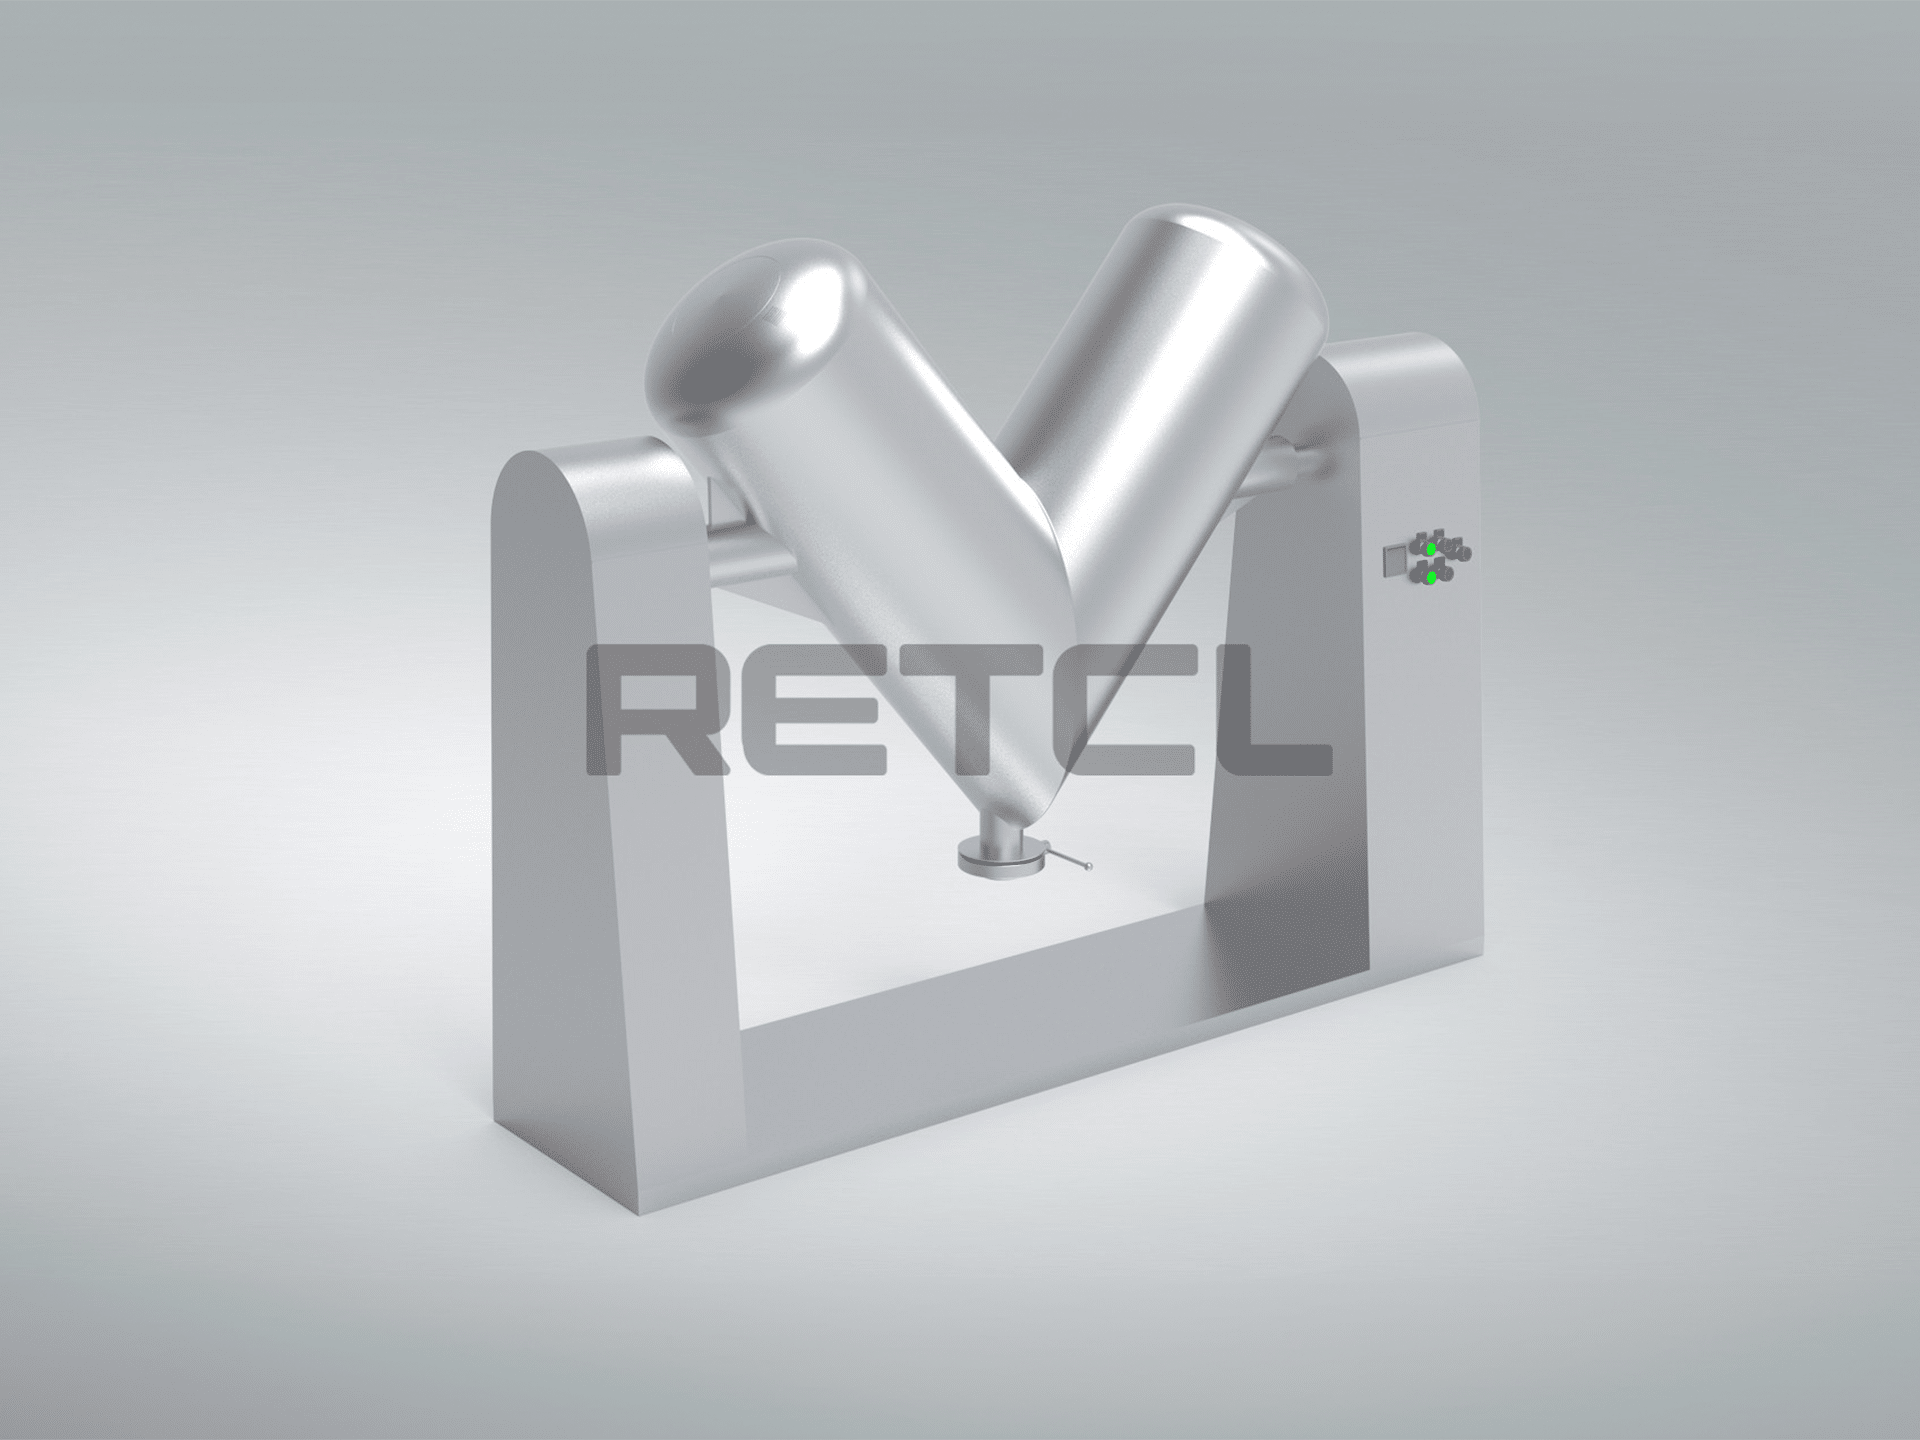 Alt text: A 3D rendering of a silver V-shaped blender or mixer on a gray background, with the word "RETEL" displayed in front of it.